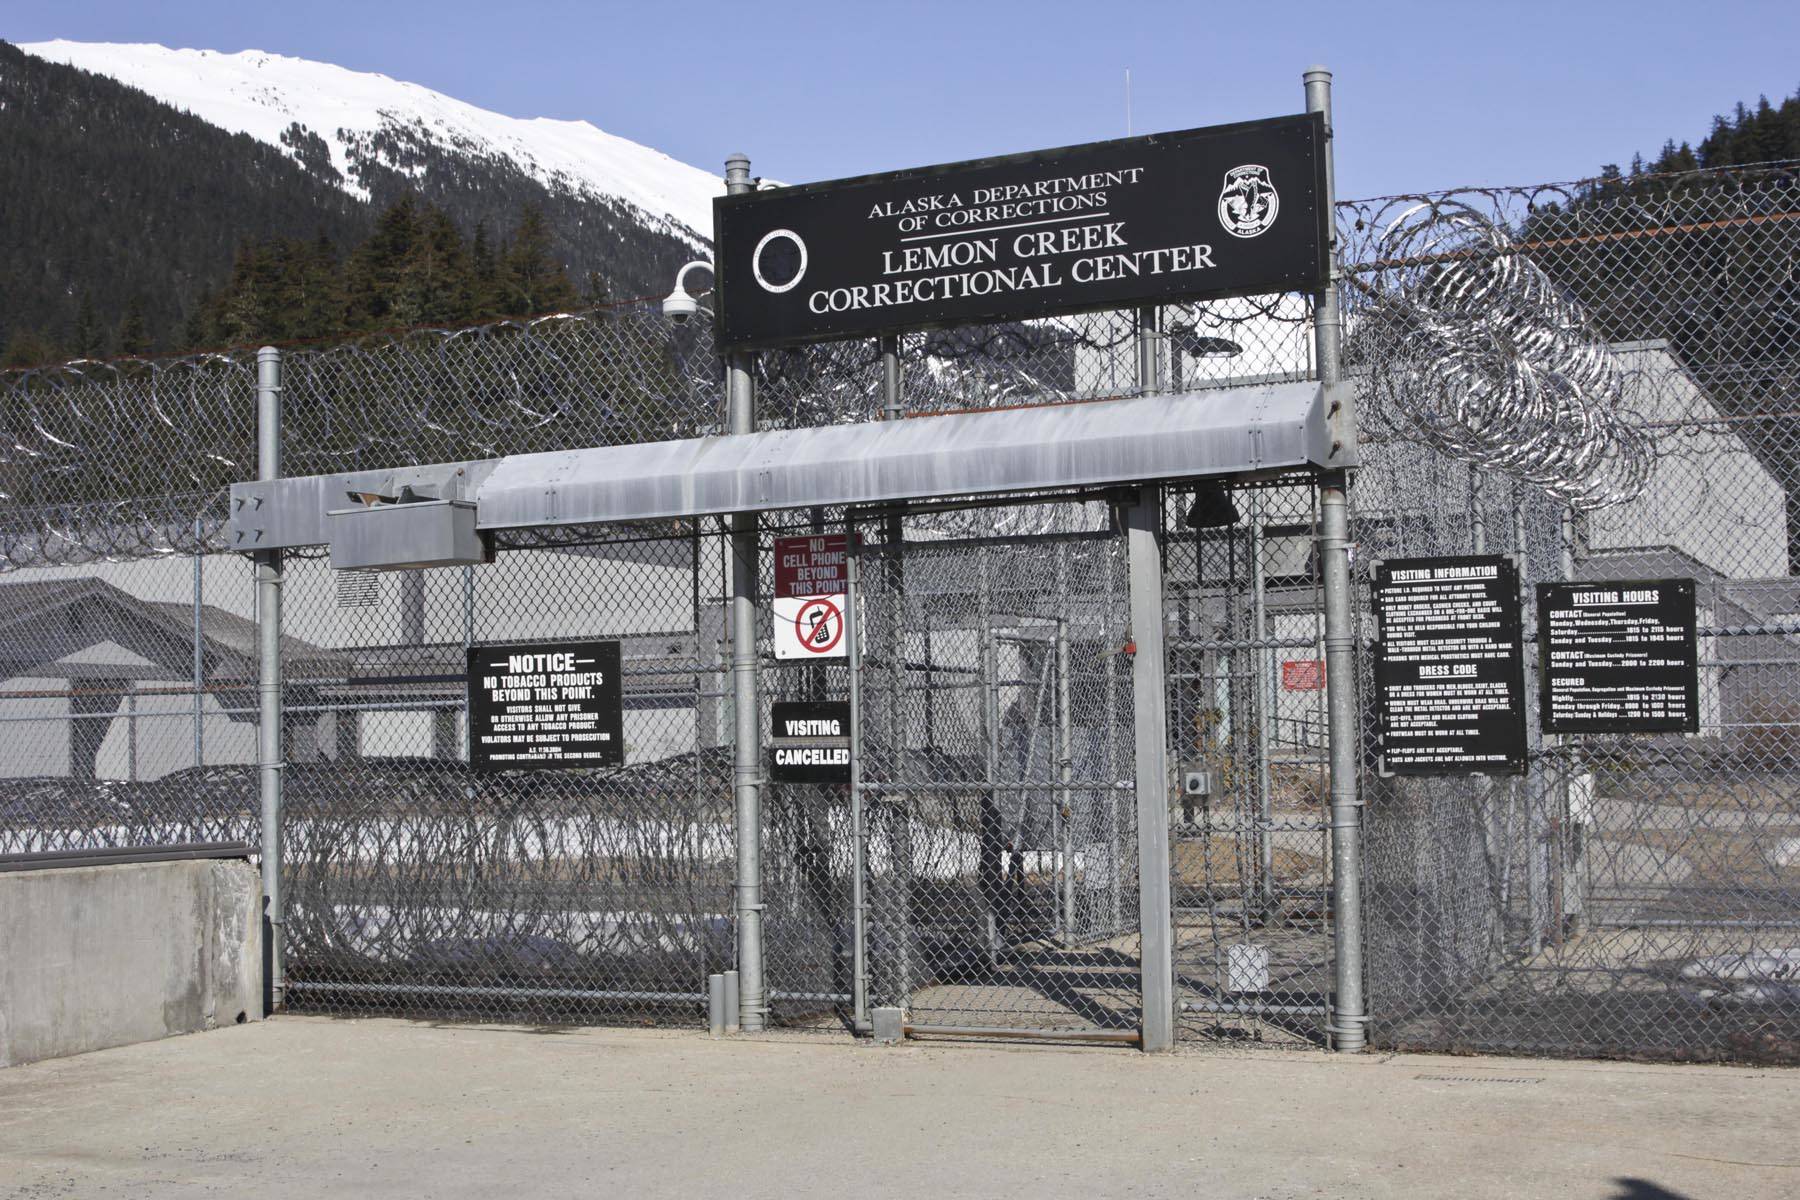 Lemon Creek Correctional Center, seen in this April 10, 2020 photo, has its first confirmed case of the coronavirus, according to Alaska Department of Corrections. The person who tested positive for COVID-19 is an unidentified corrections officer. (Michael S. Lockett | Juneau Empire)